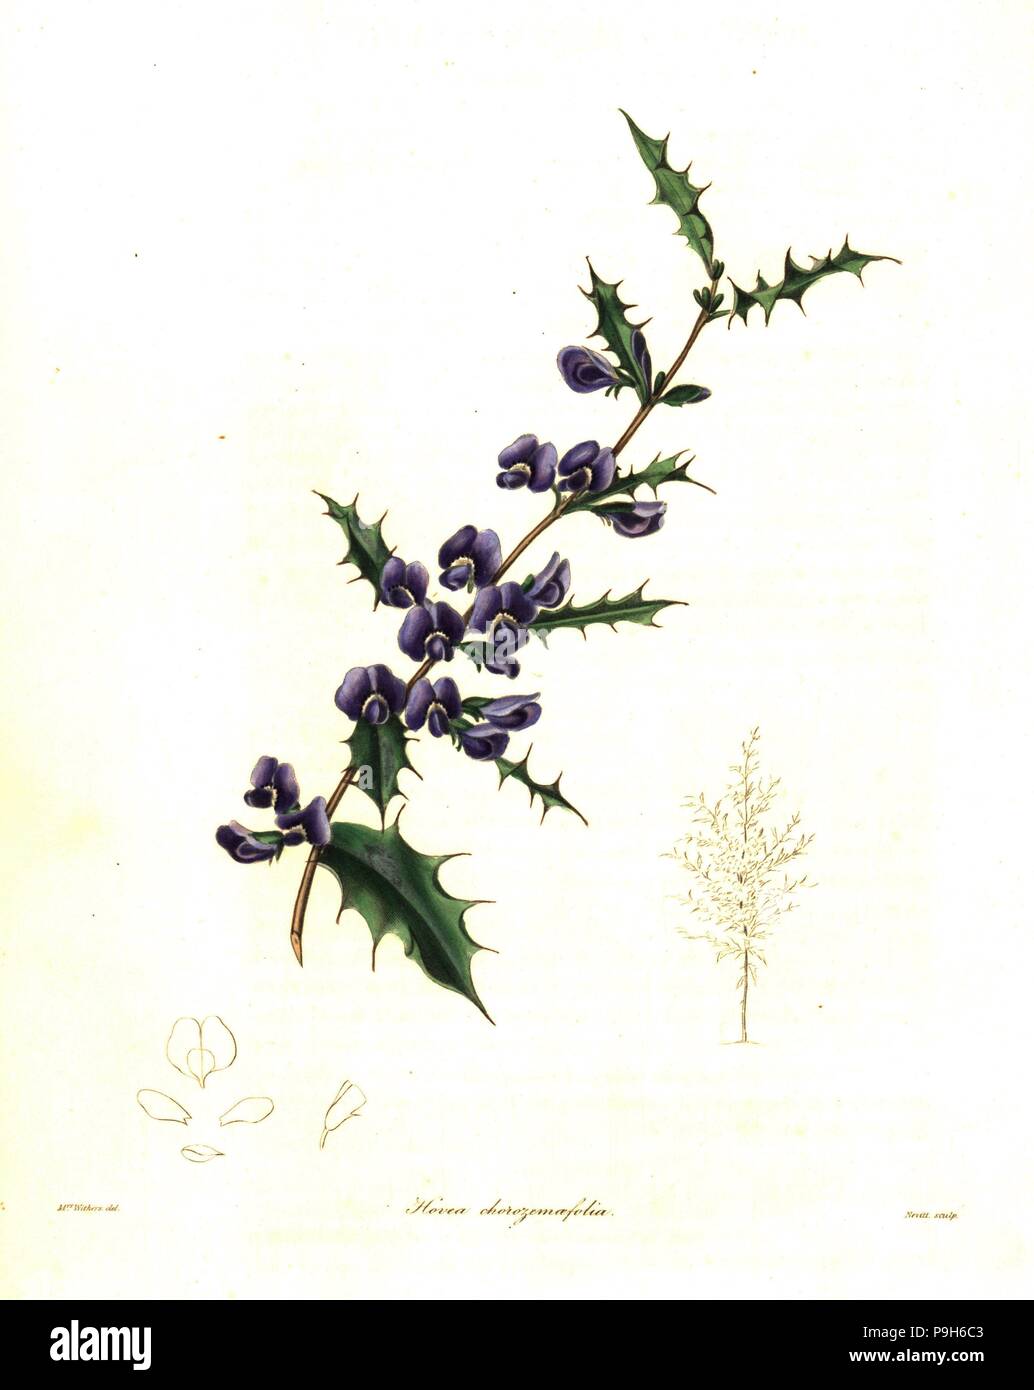 Holly-leaved hovea, Hovea chorizemifolia (Chorizema-leaved hovea, Hovea chorizemaefolia). Handcoloured copperplate engraving by S. Nevitt after a botanical illustration by Mrs Augusta Withers from Benjamin Maund and the Rev. John Stevens Henslow's The Botanist, London, 1836. Stock Photo